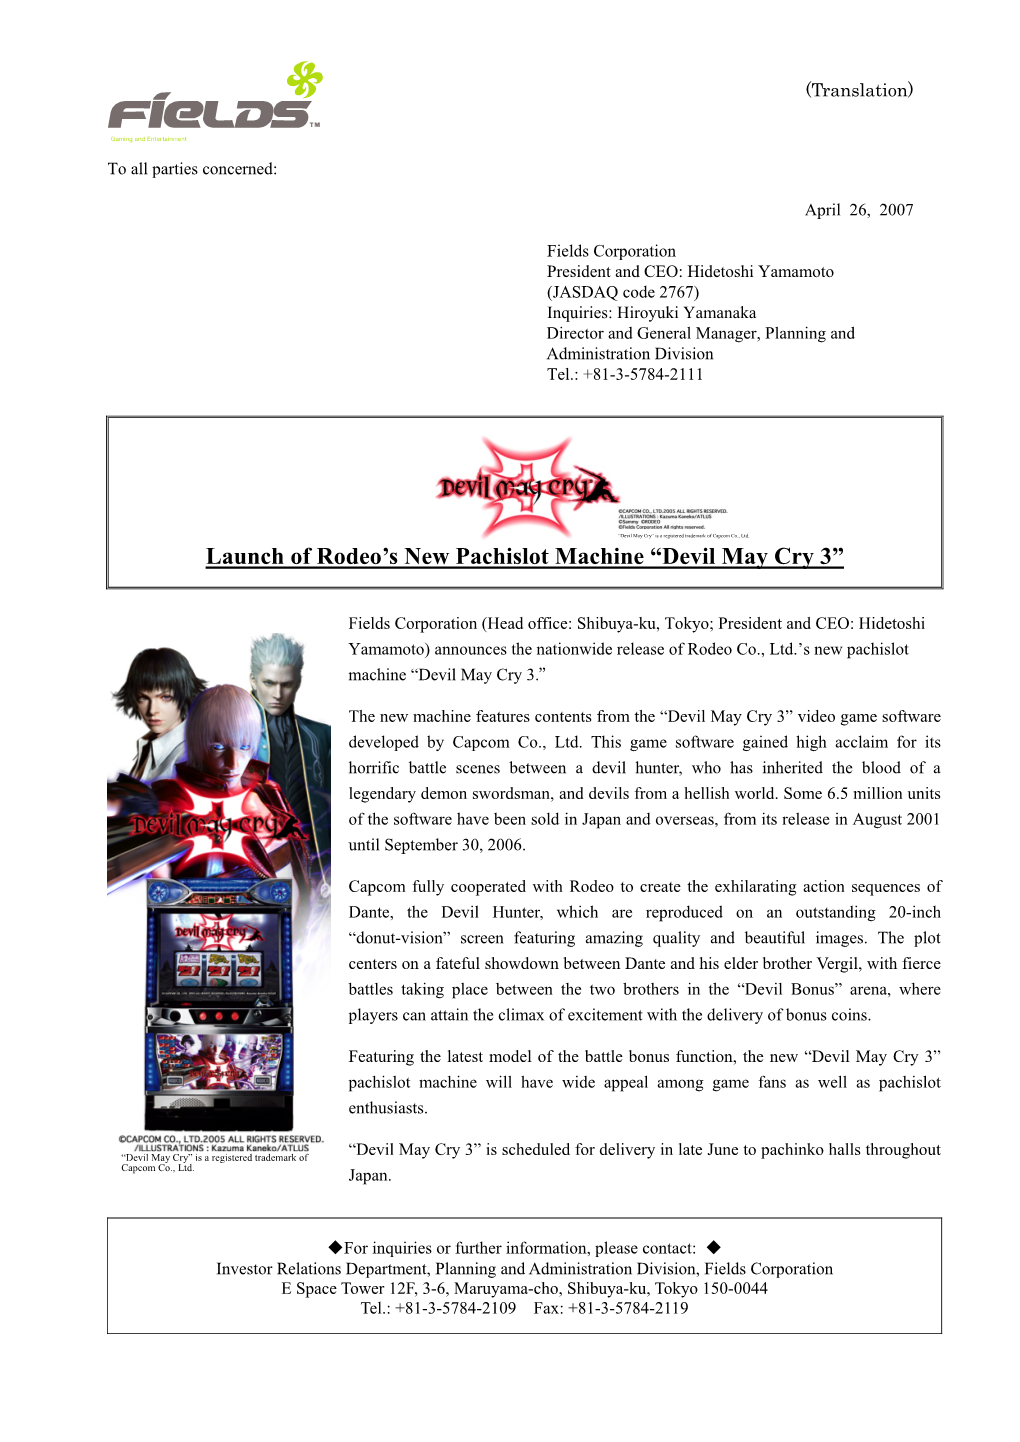 Launch of Rodeo's New Pachislot Machine “Devil May Cry 3”